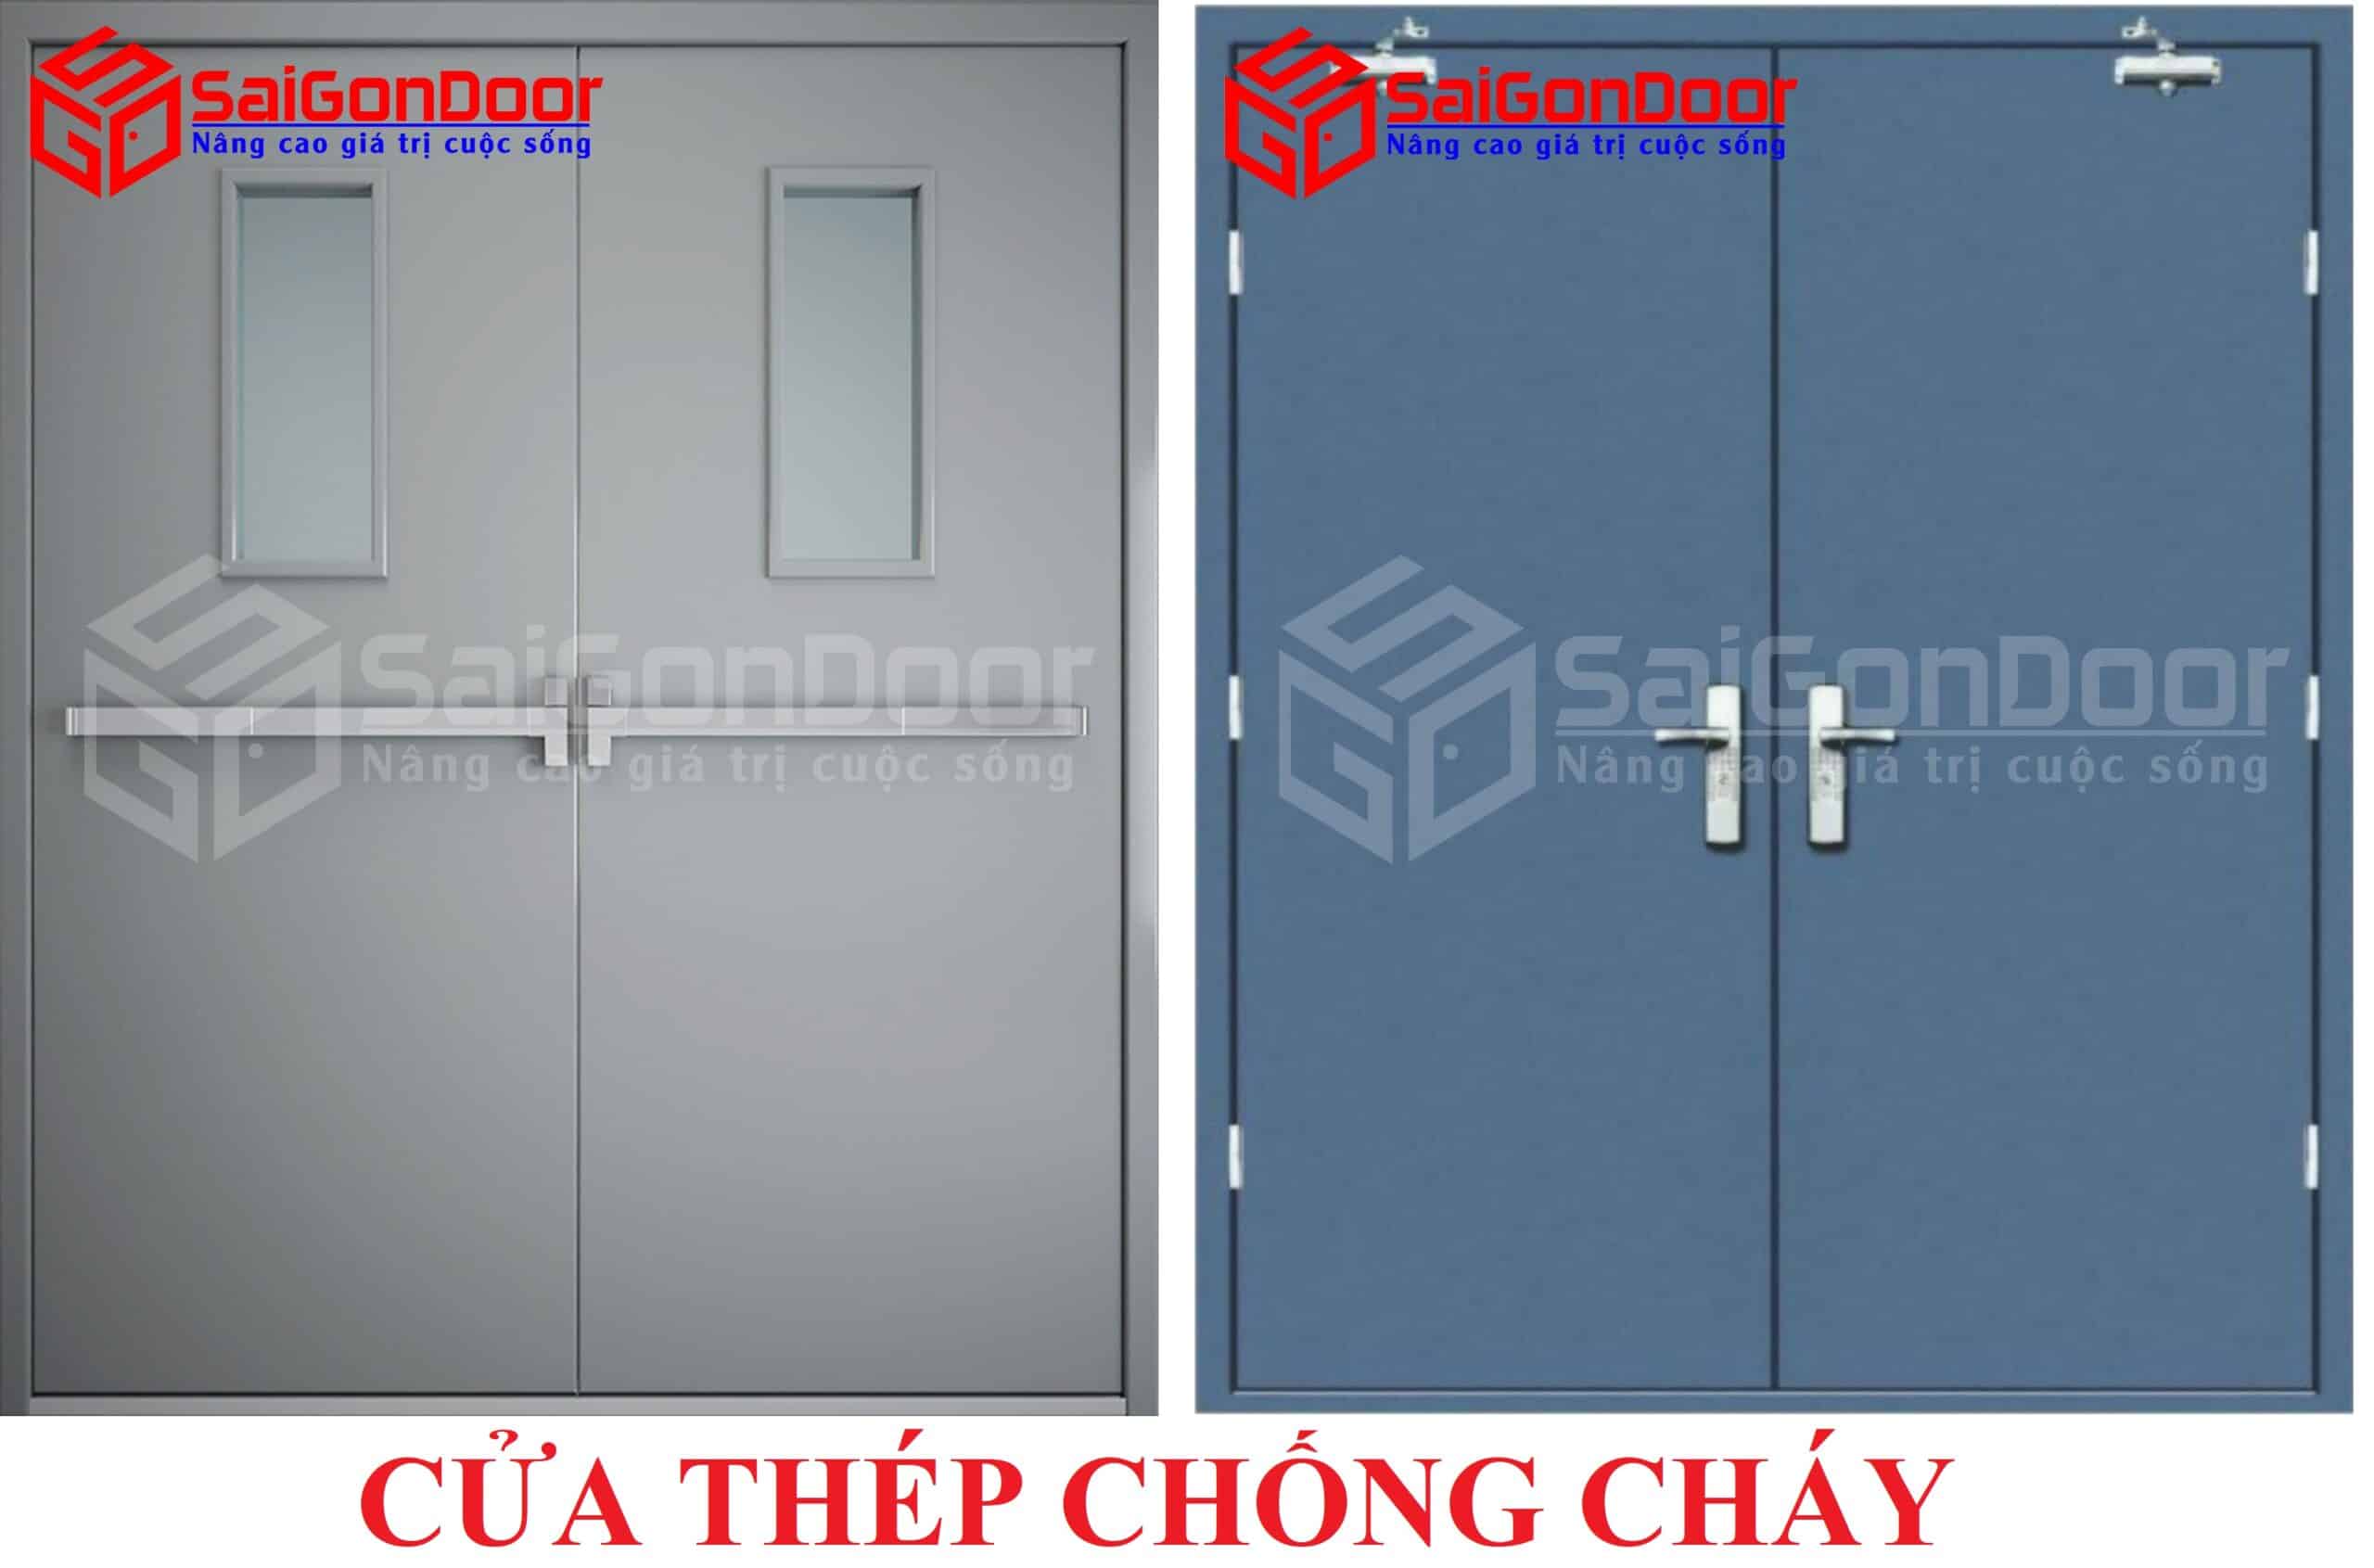 Cua thep chong chay 2 P2G2 TTH.png Copy scaled